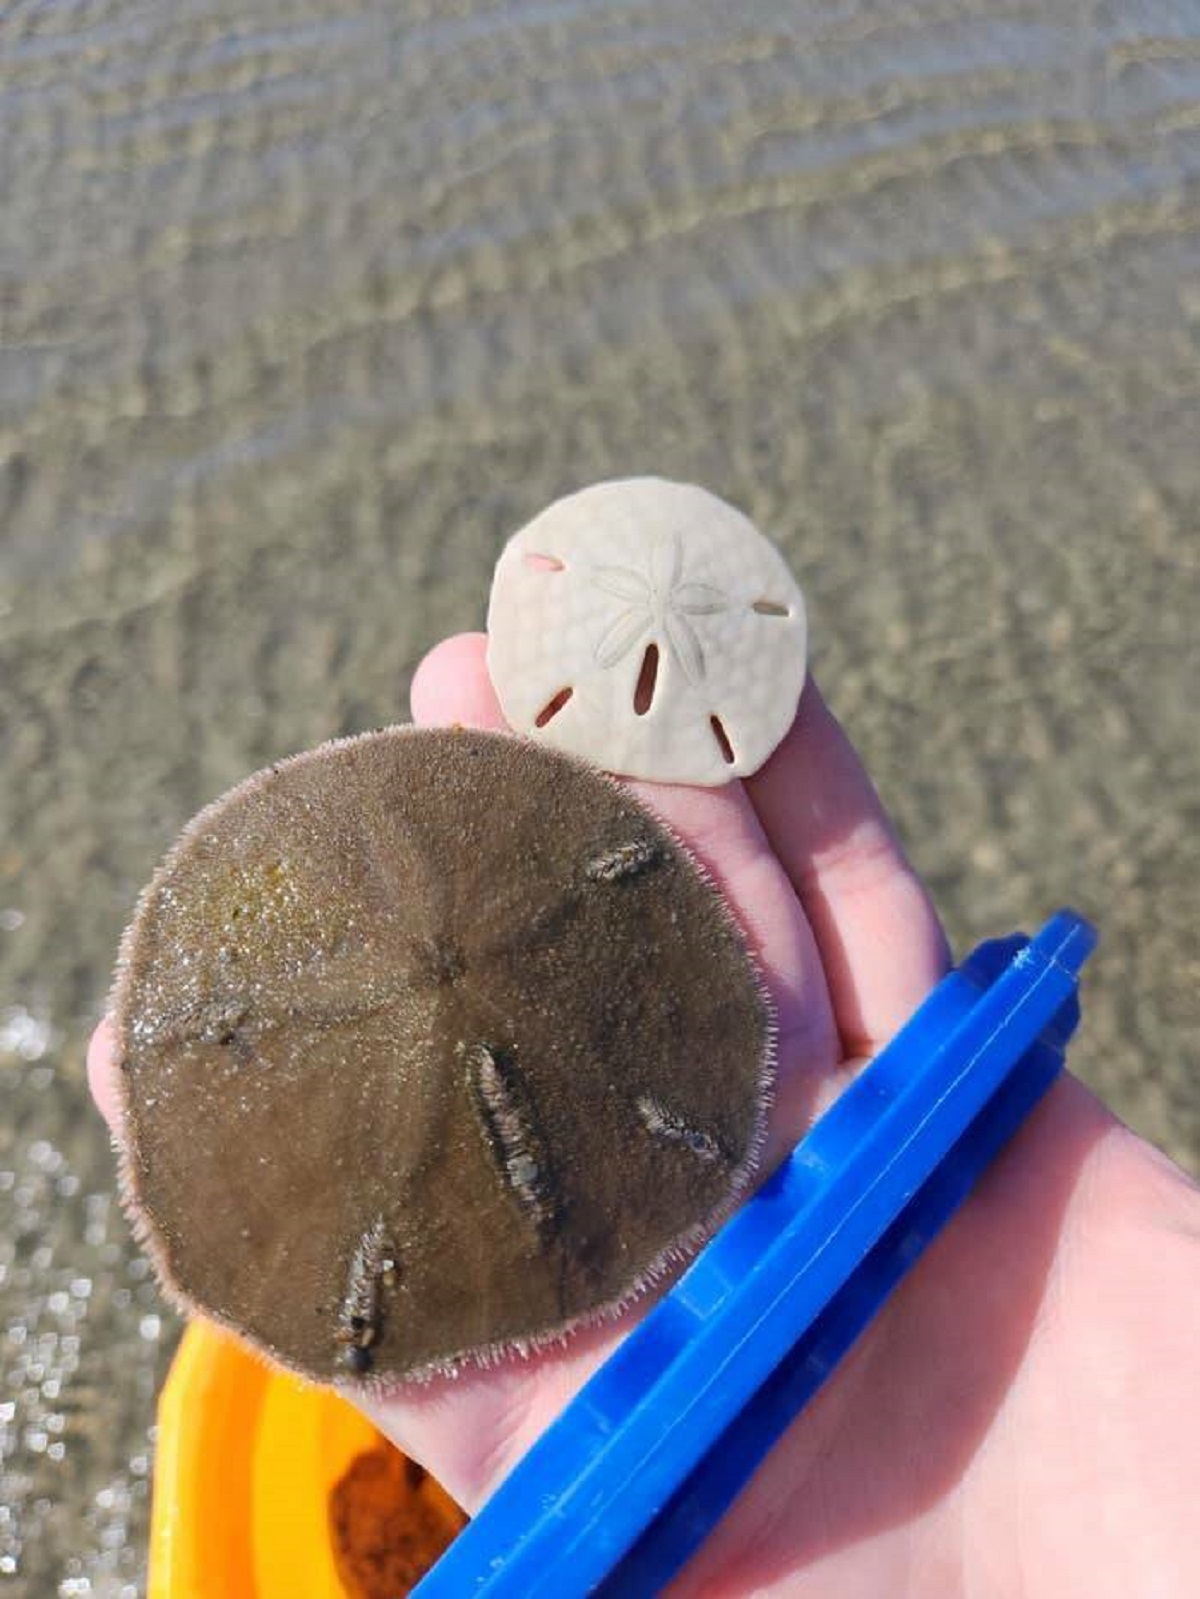 This is what a living sand dollar looks like compared to a dead one: